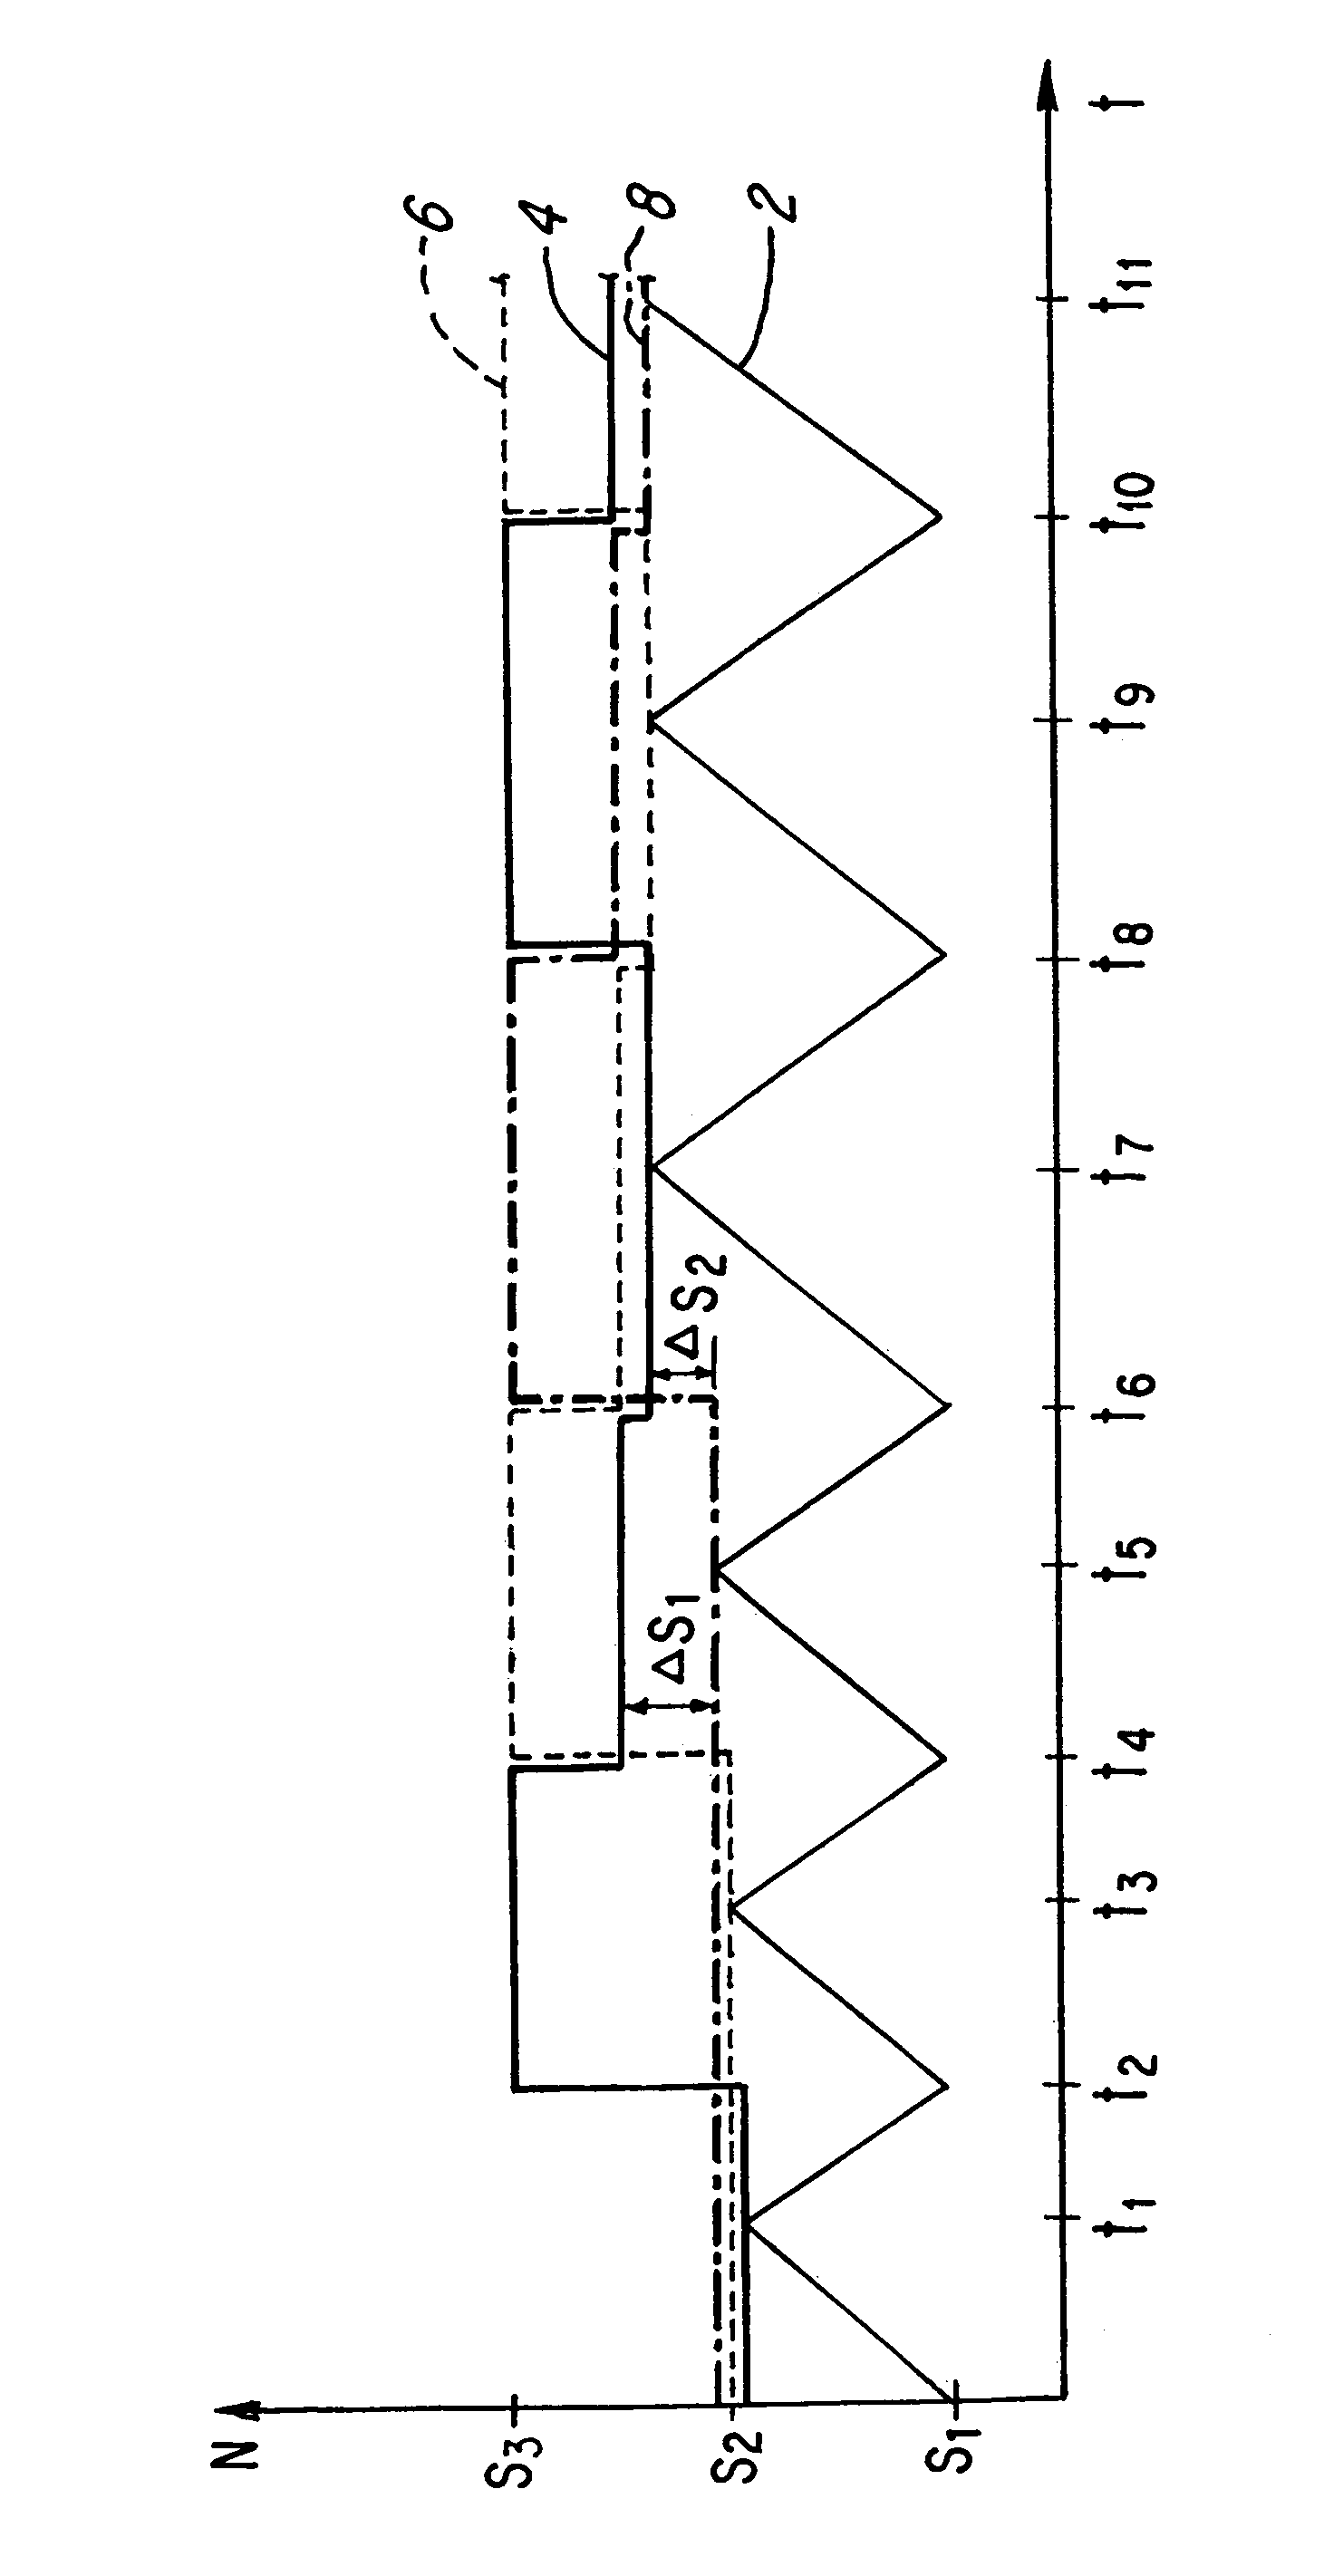 Method for controlling several pumps